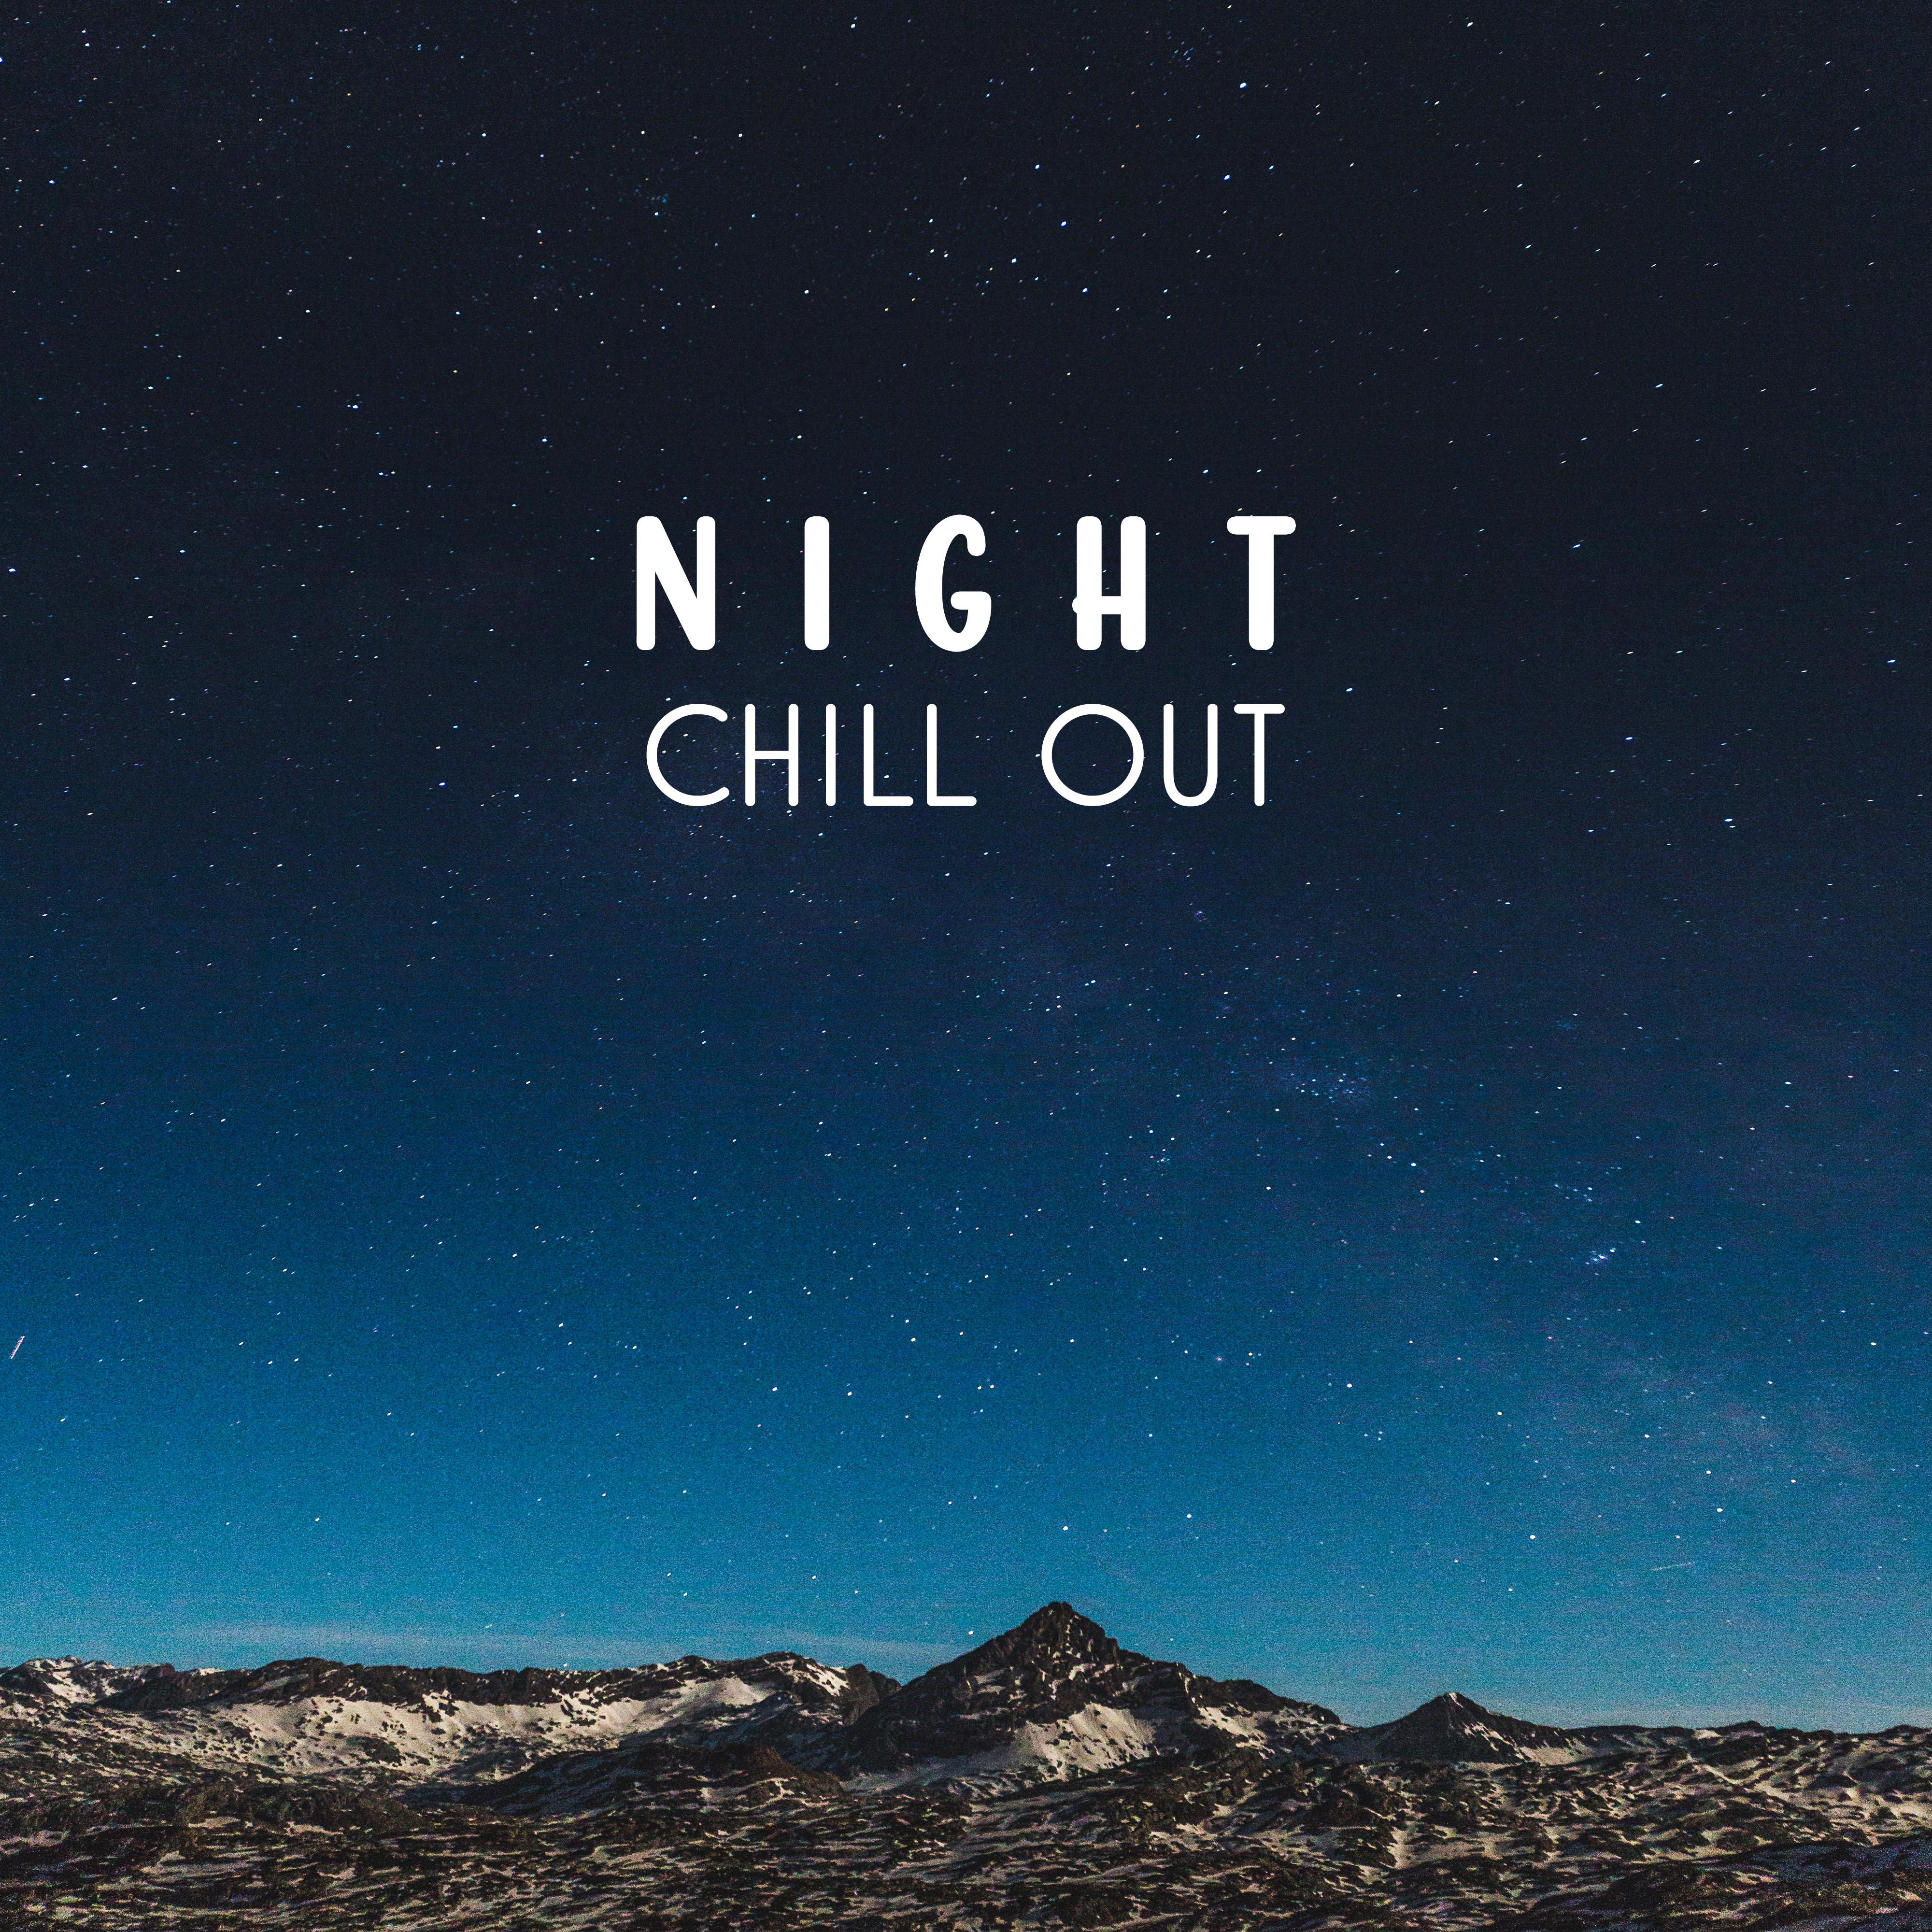 Night Chill Out – Soft Sounds for Night, Evening Relax with Chill Out Beats, Rest a Bit